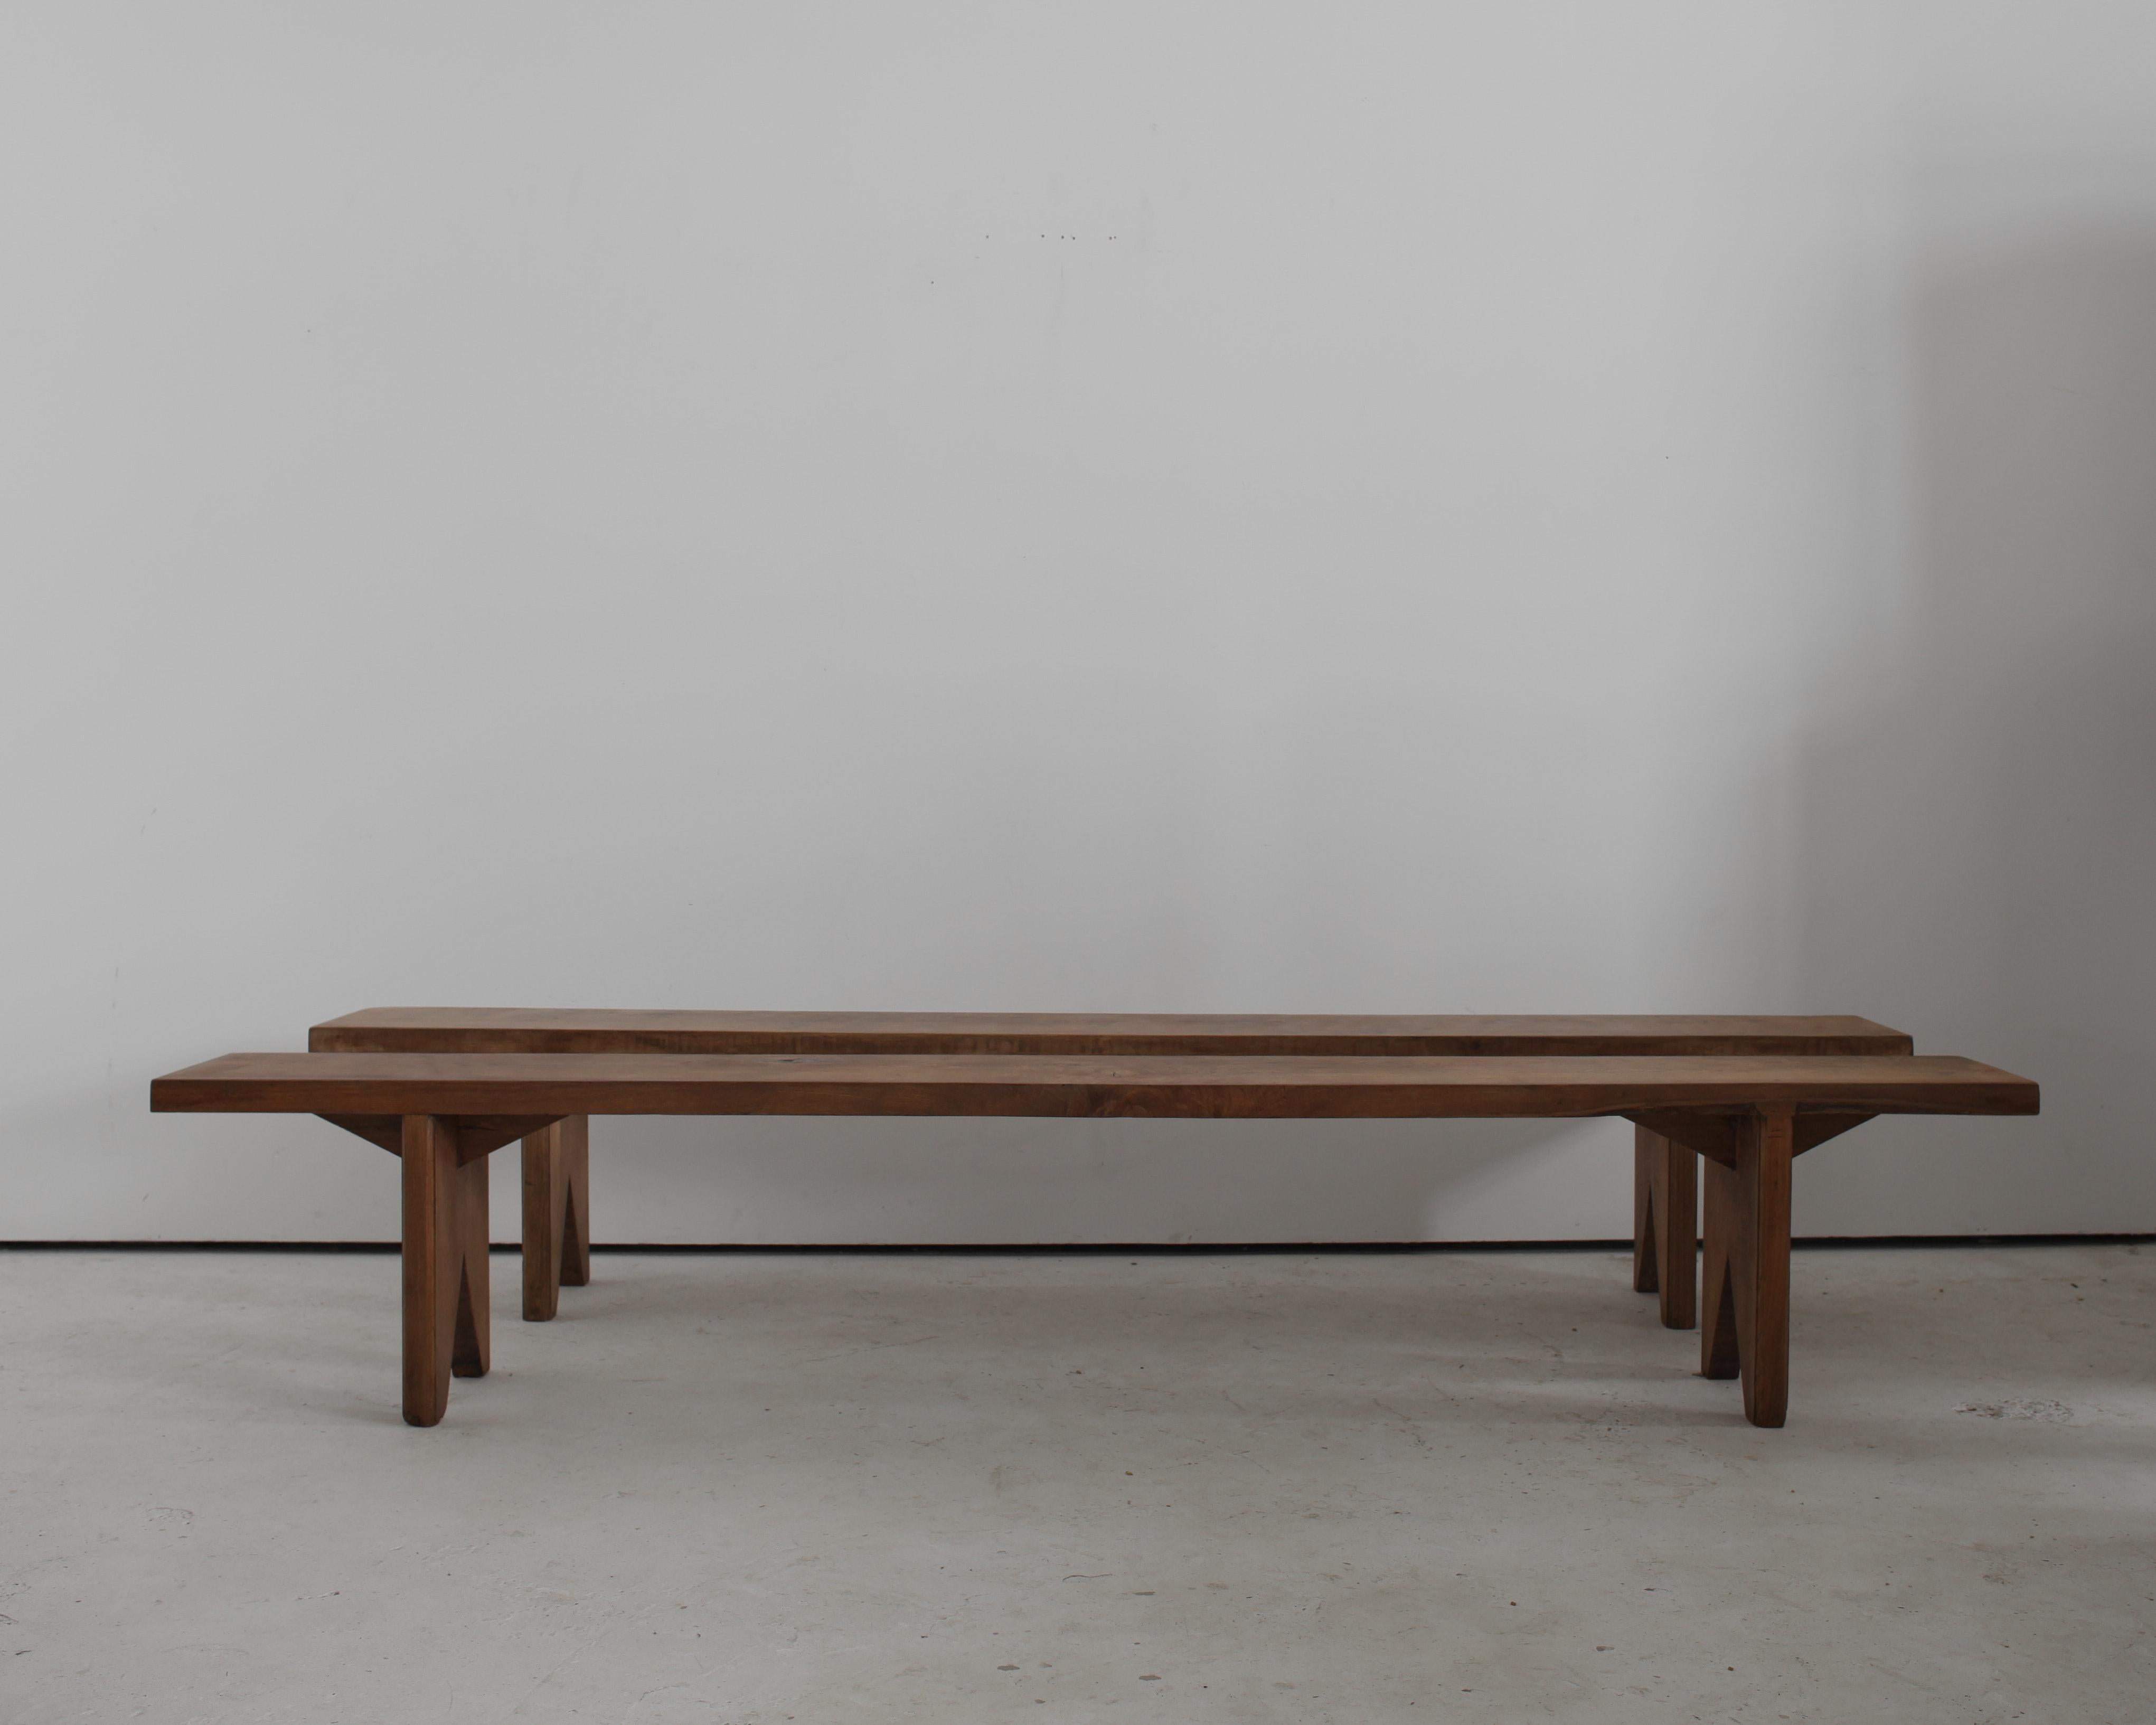 XL pair of solid elm benches from Braga in Northern Portugal.

Constructed simply in the 18th style with thick (4.5cm) slab tops.

These were made by an artisan in the 1960s.